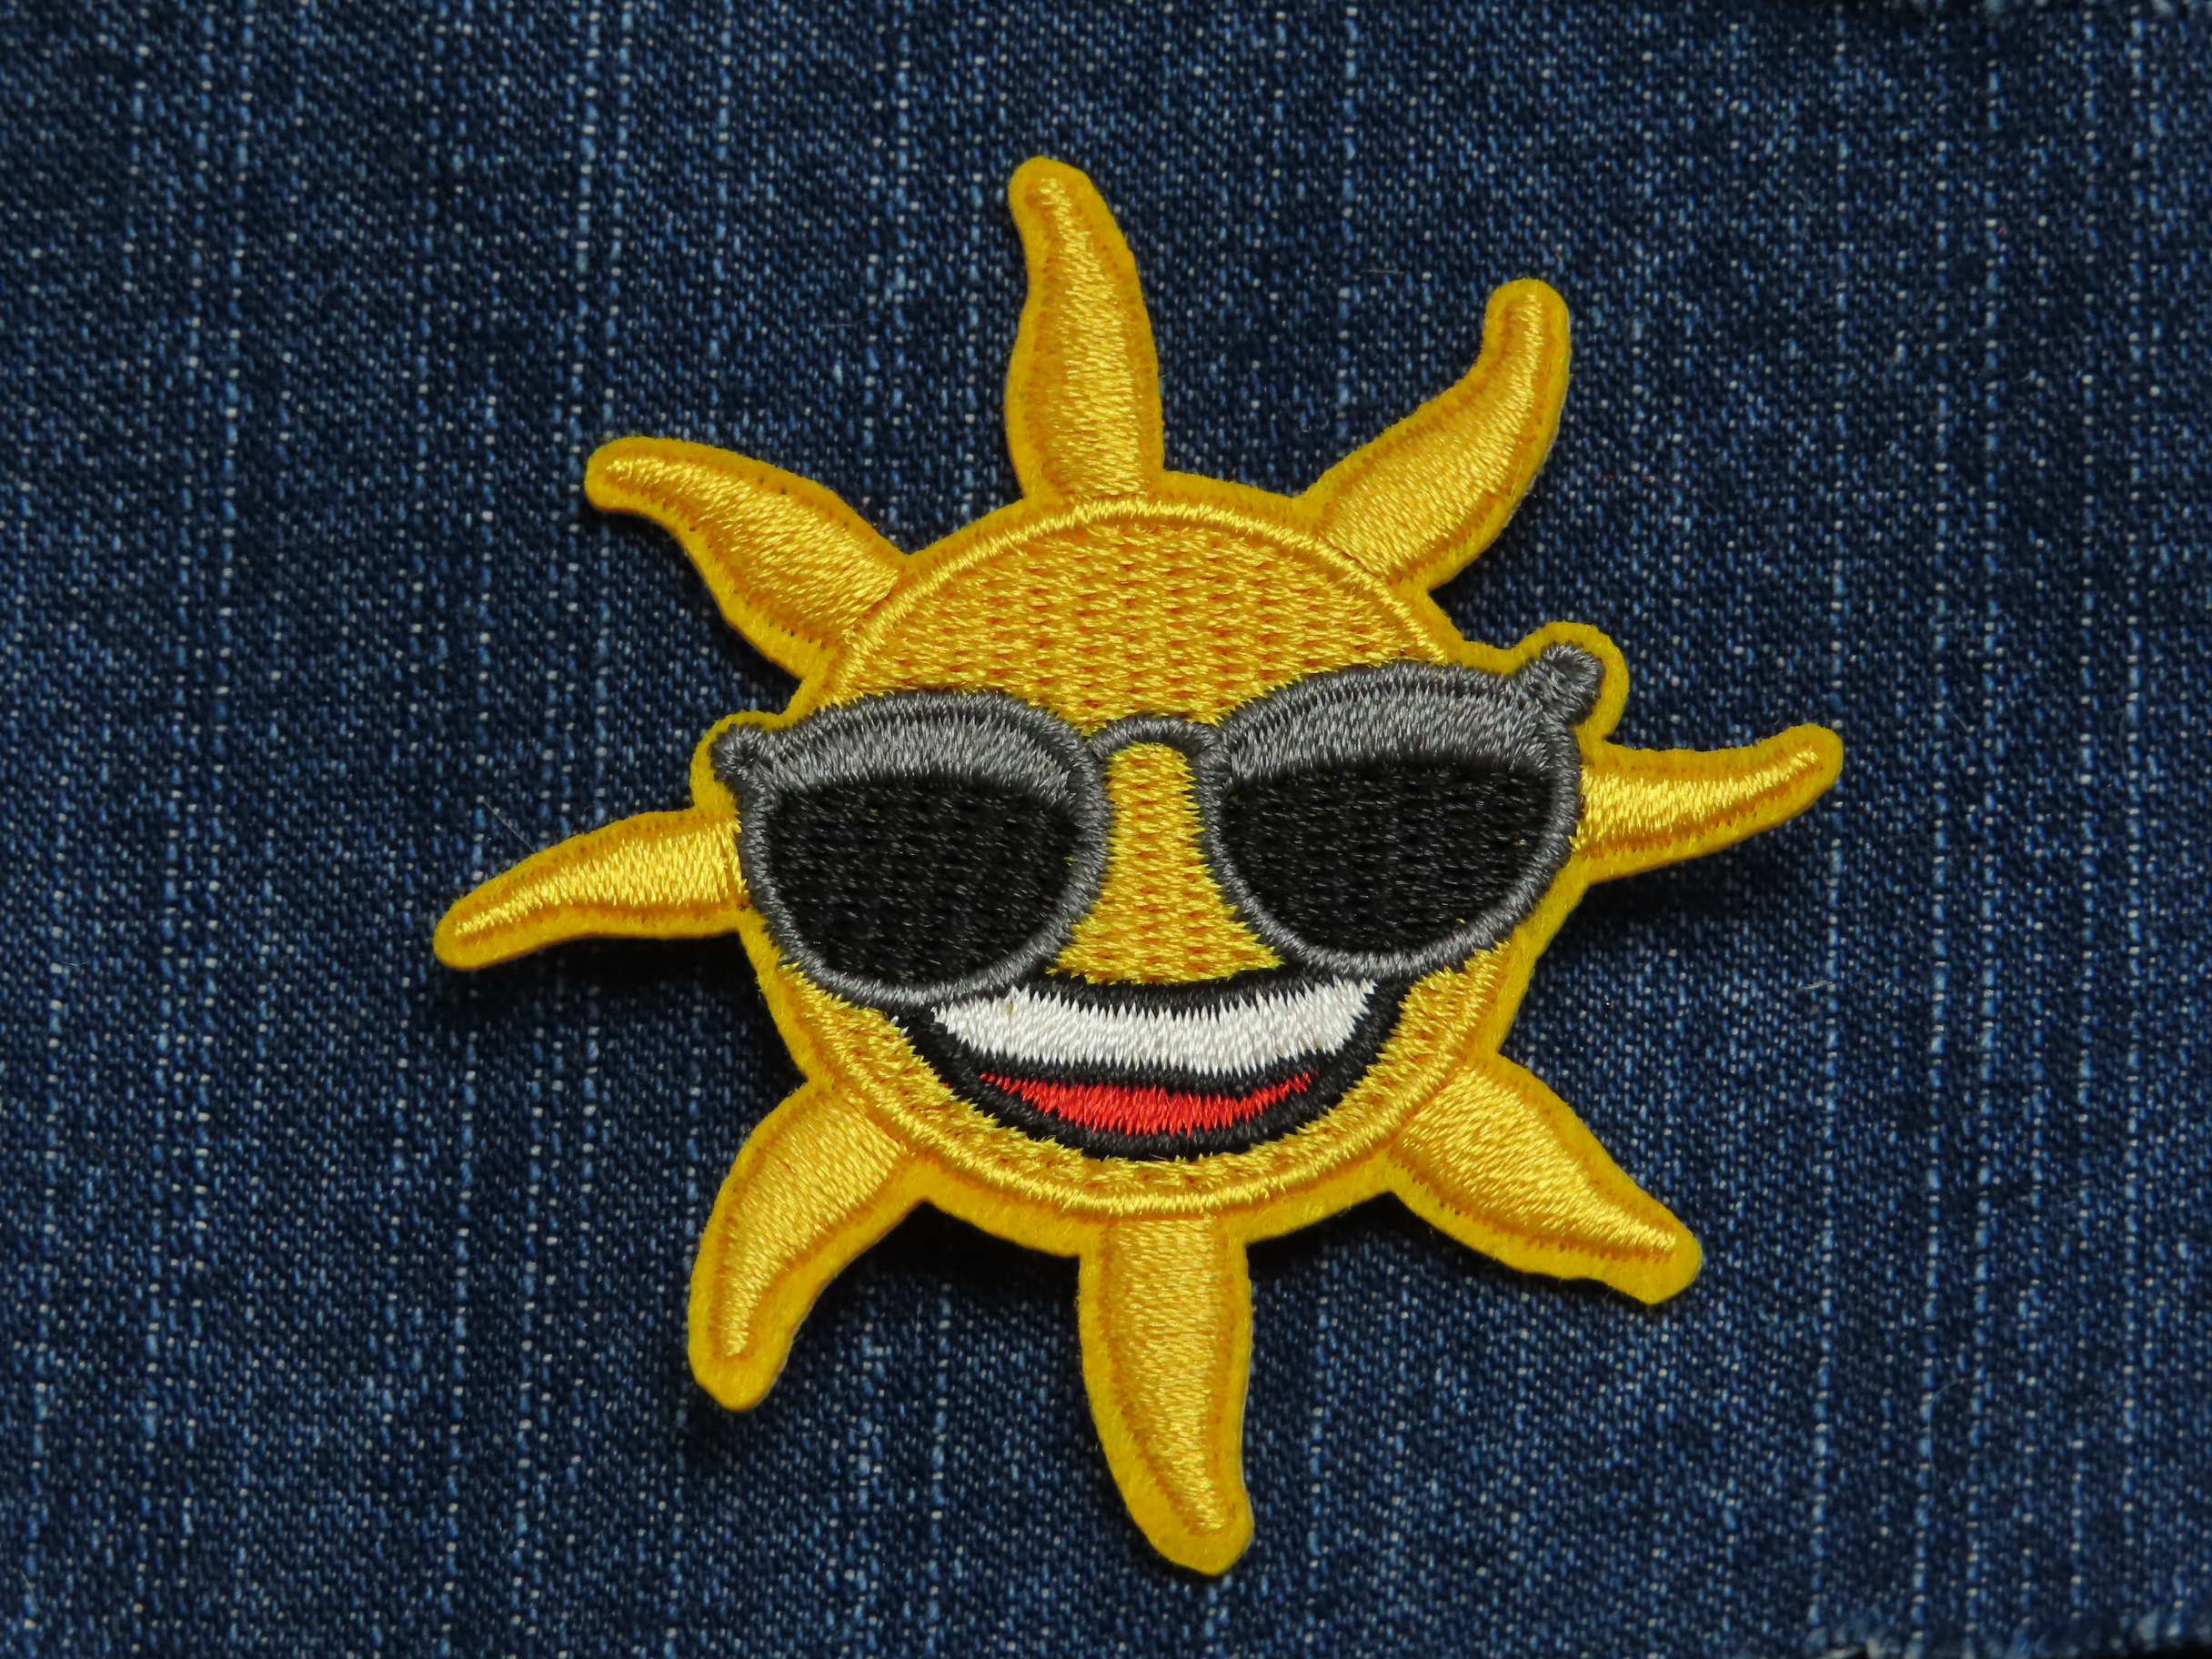 Buy Space Embroidery Applique Iron On Patches For Clothing Badge